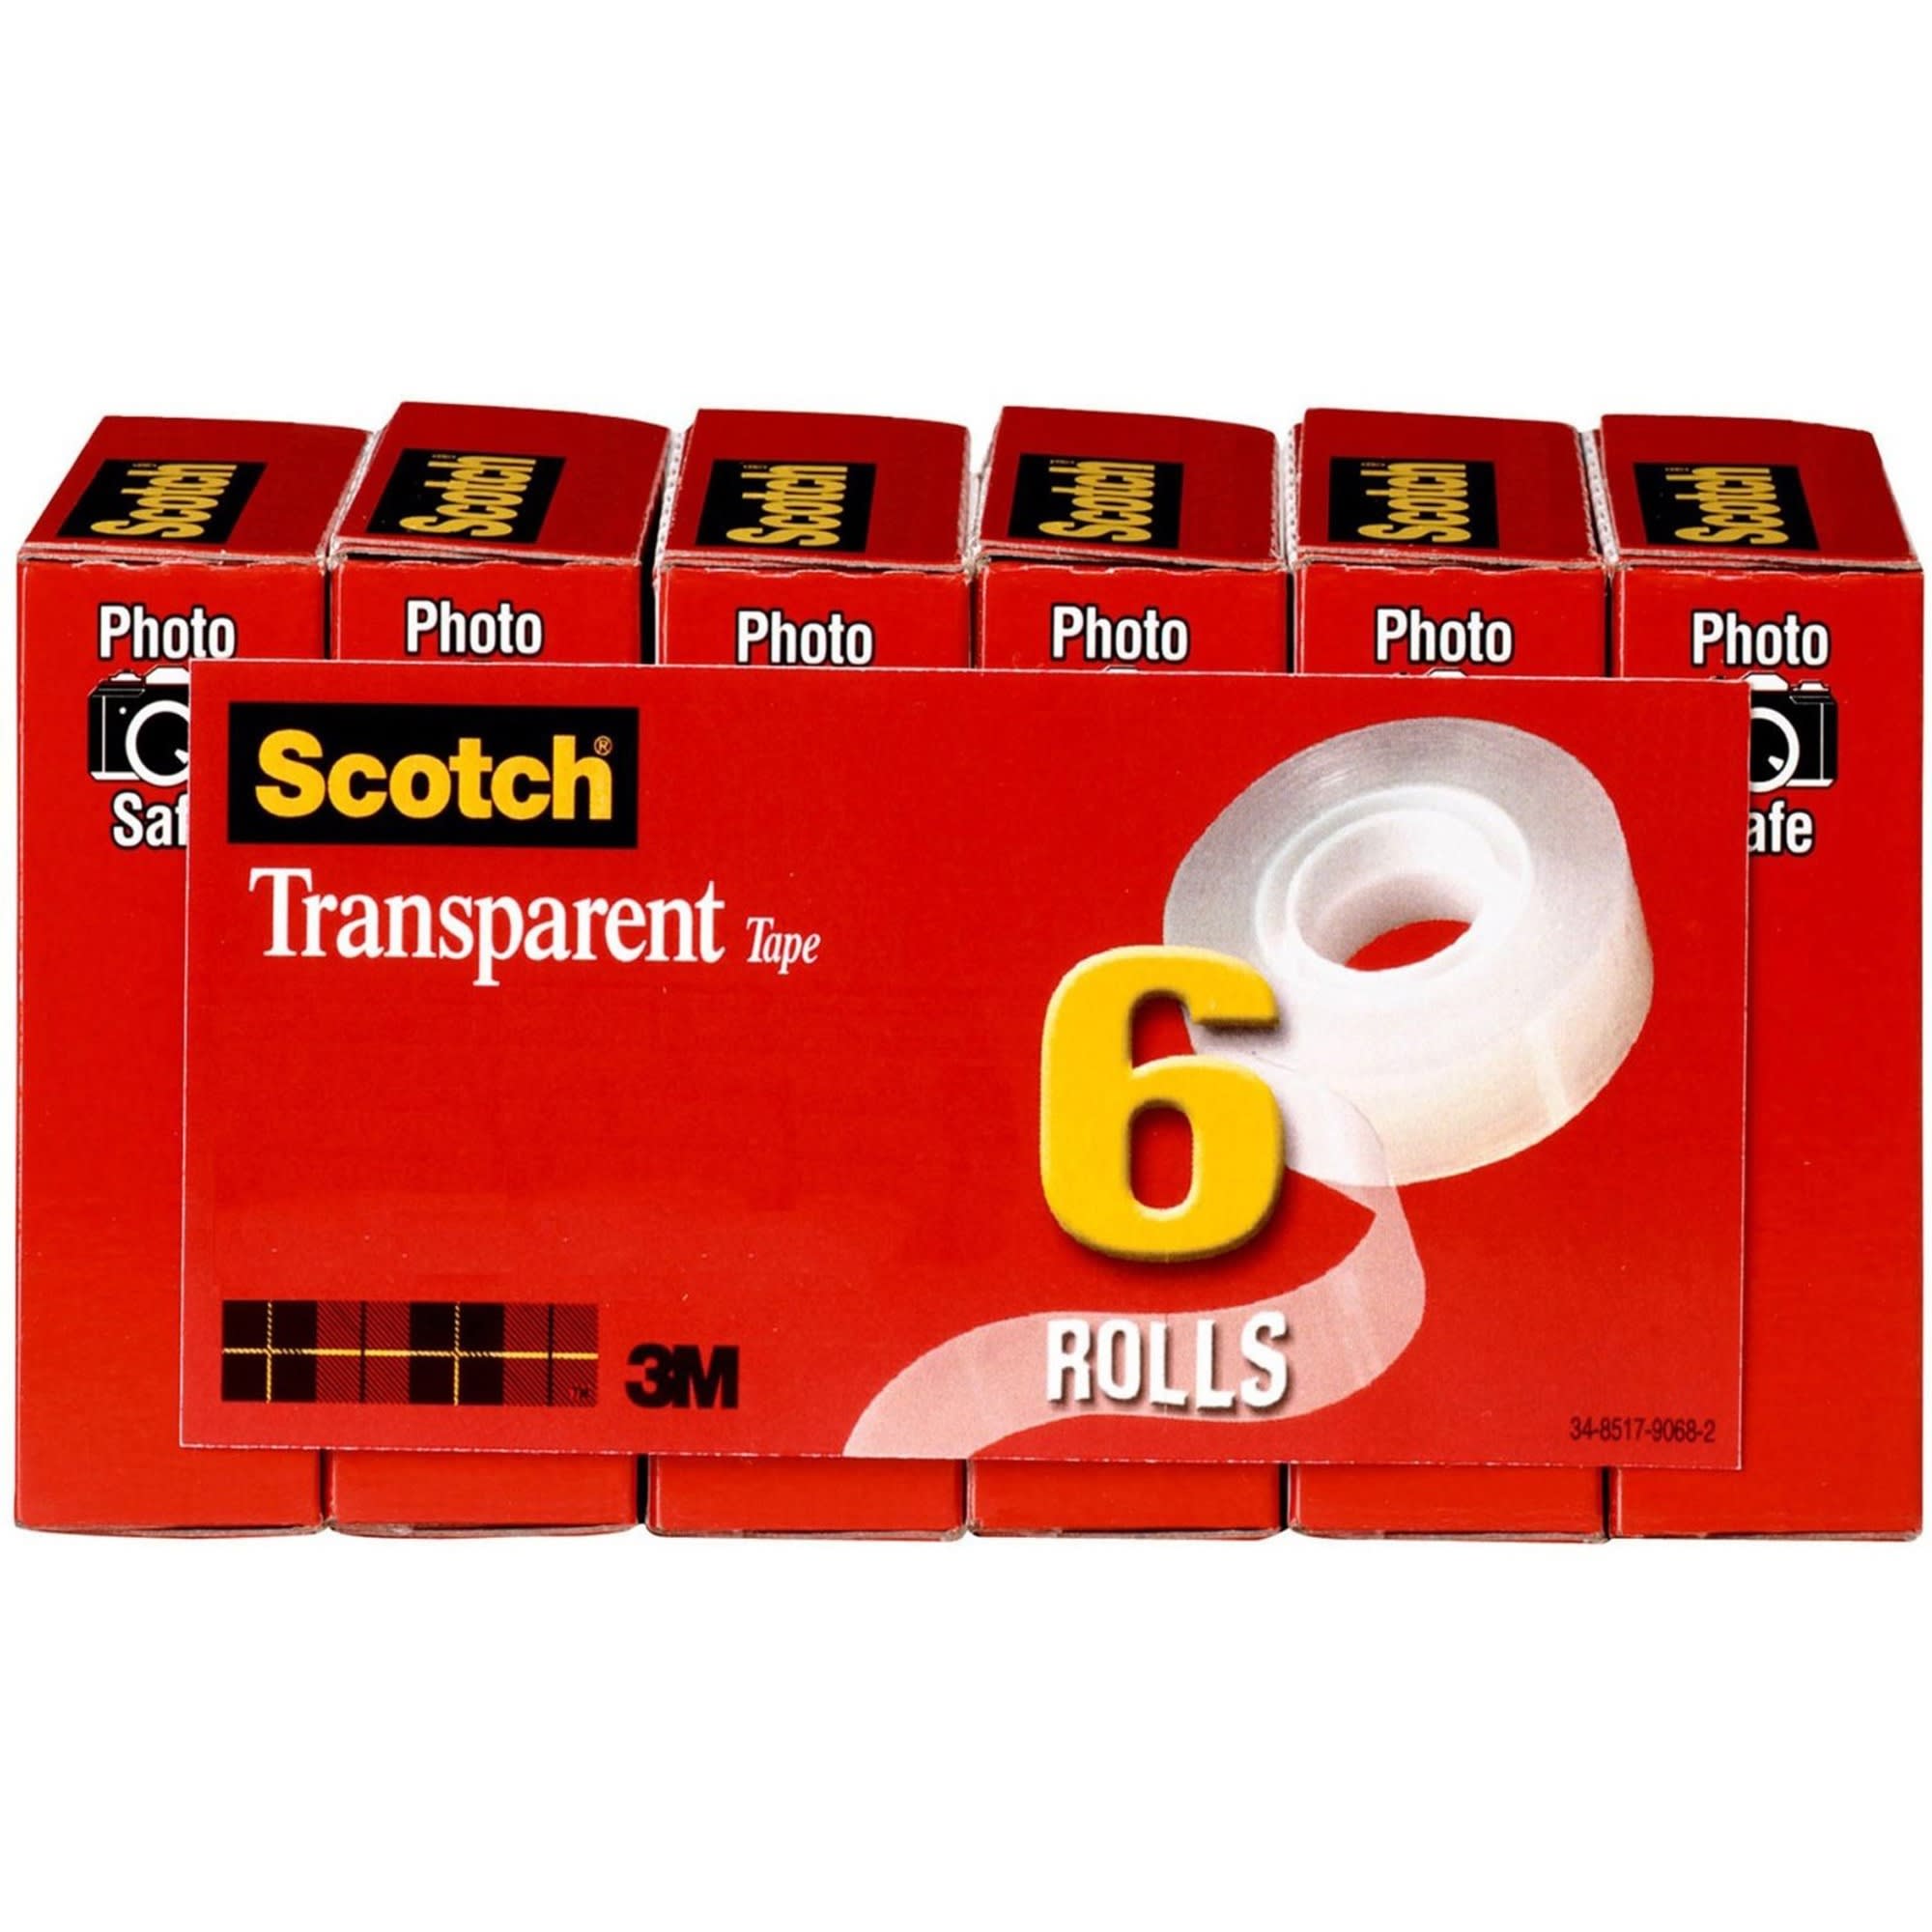 https://media.officedepot.com/image/upload/v1665780658/content/AEM%20Images%20%28WWW%2CODP%29/Office%20Supplies/Tapes%20and%20Adhesives/Office%20Tape/Transparent%20Tape.jpg